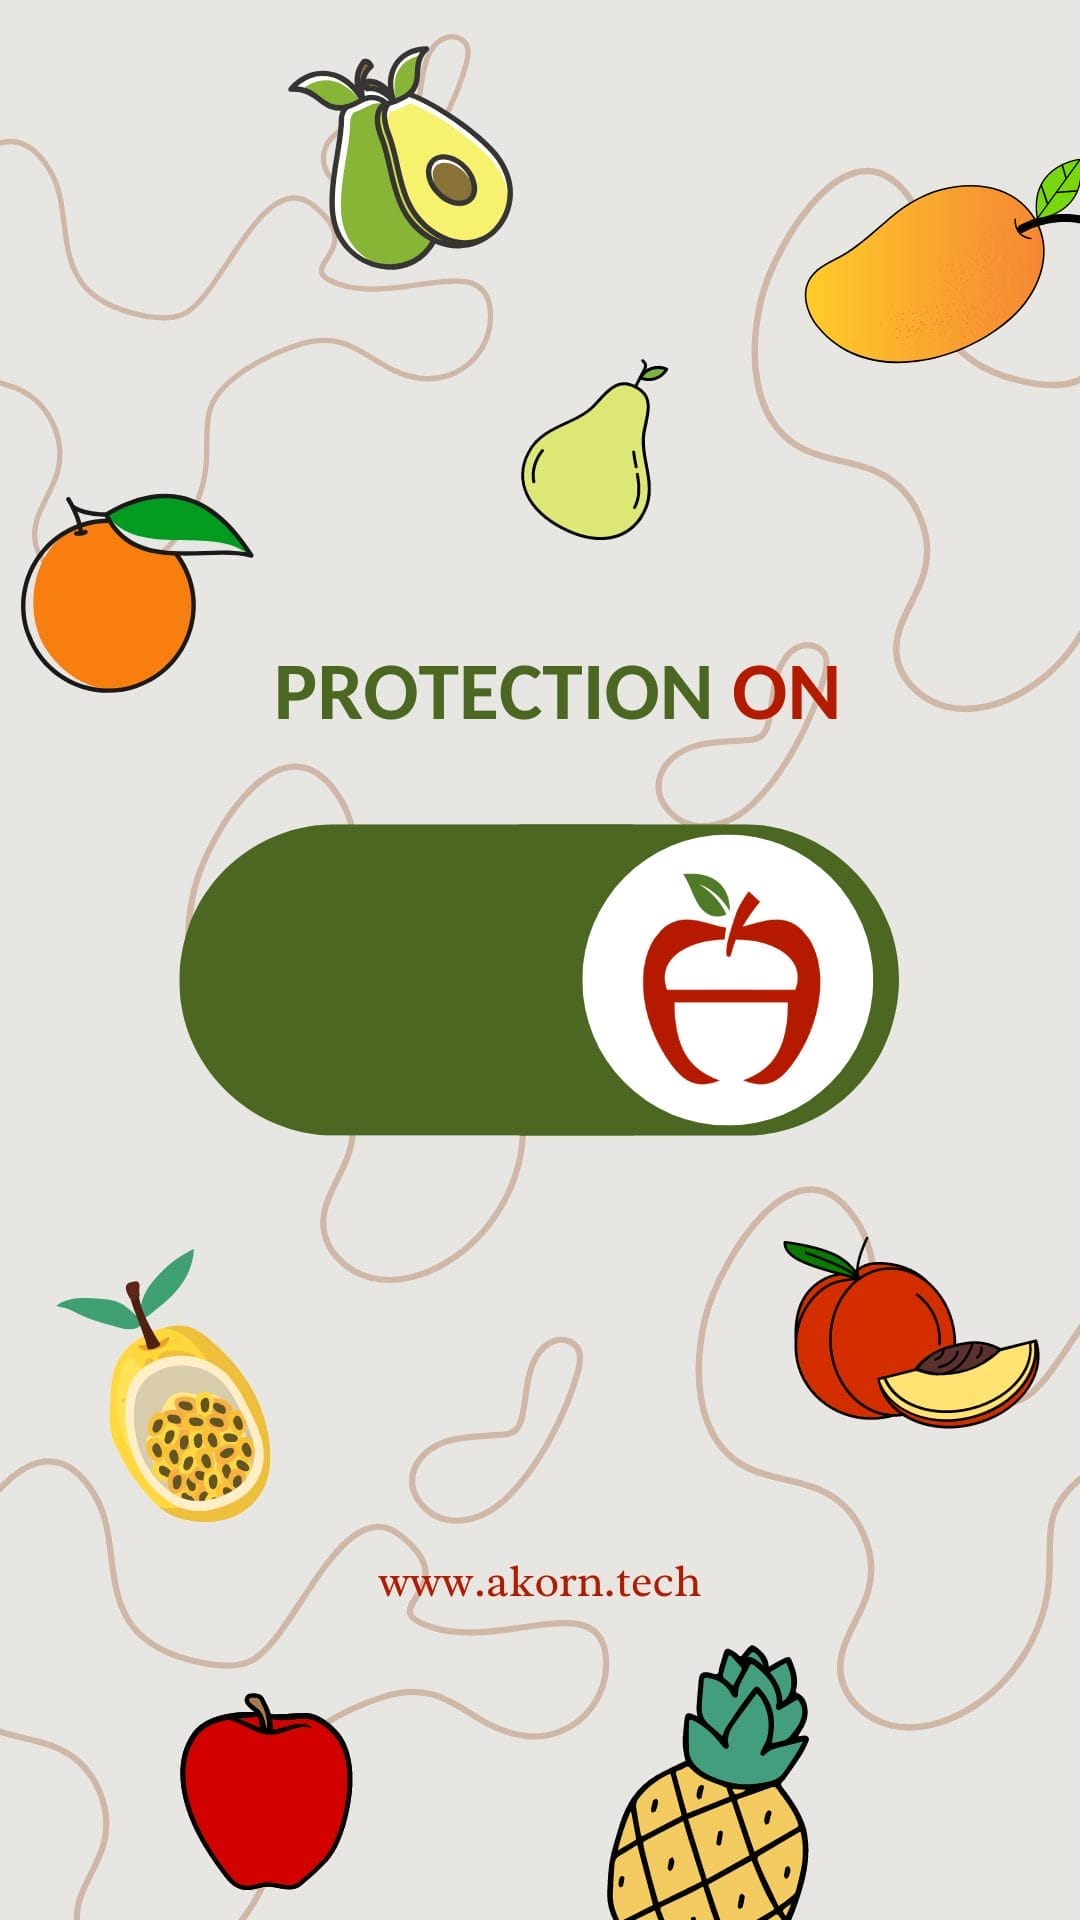 Turn on the Akorn protection and sea in the freshness